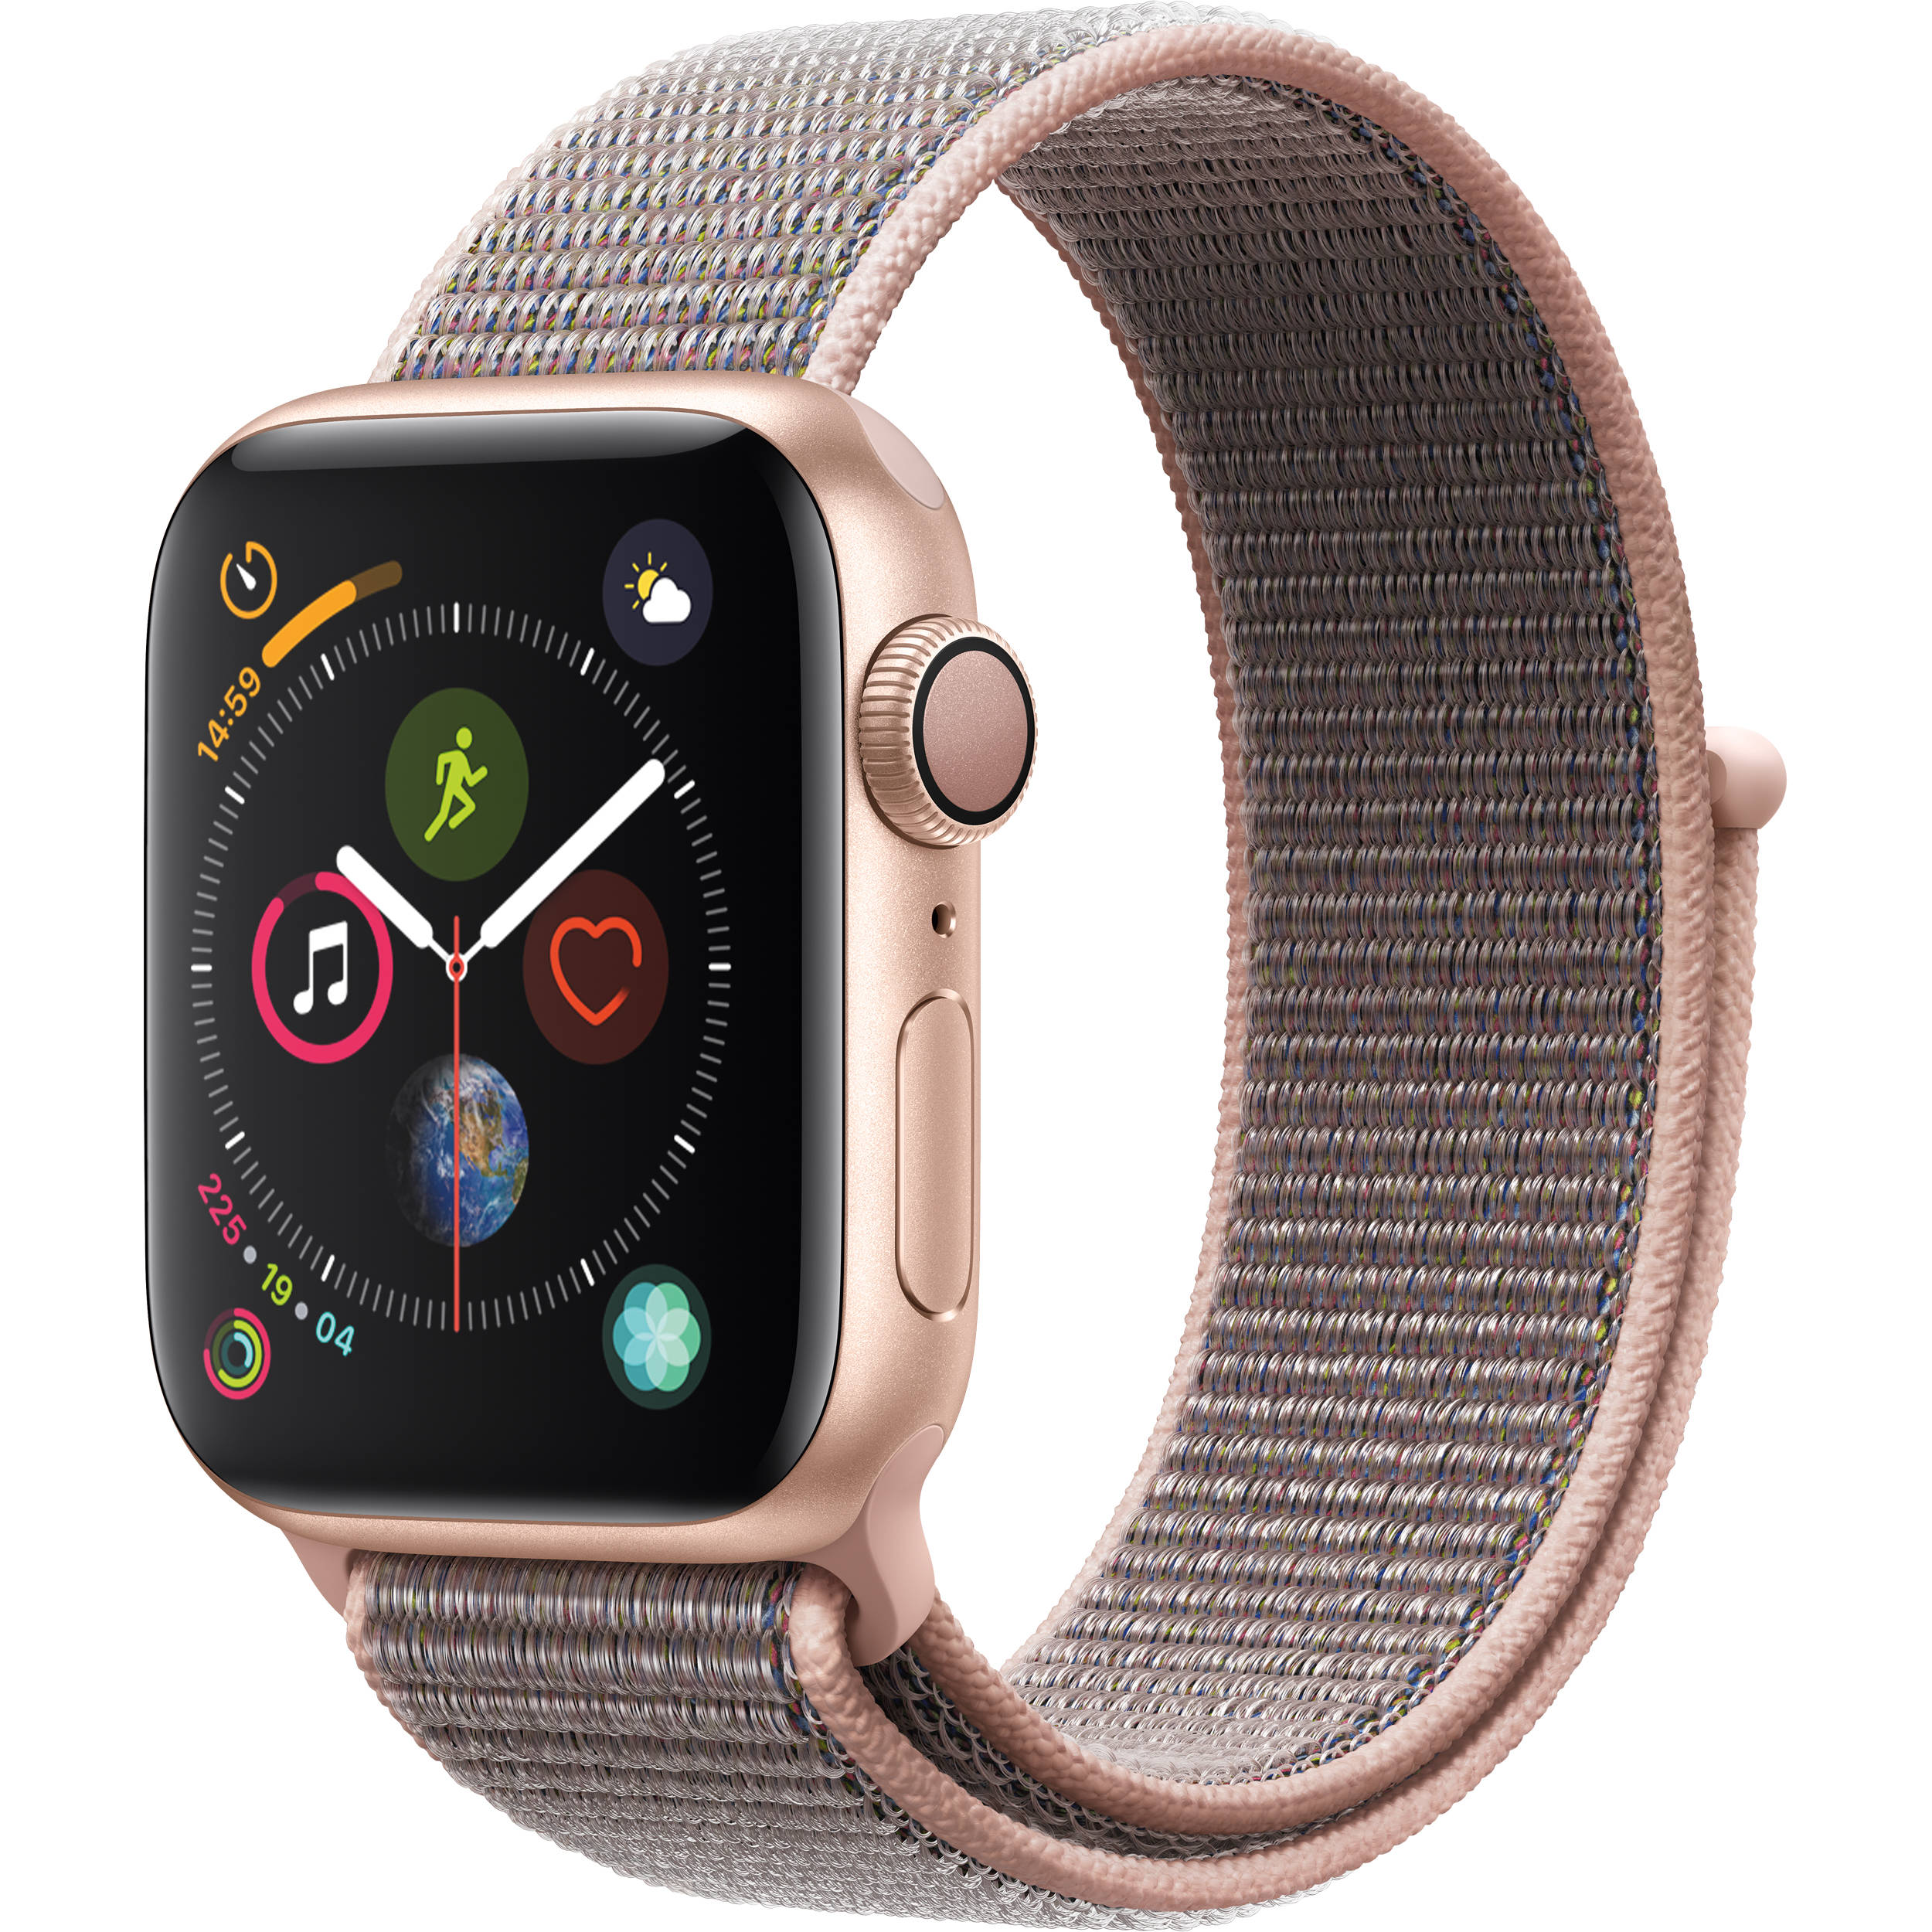 apple watch series 3 rose gold 38mm gps only